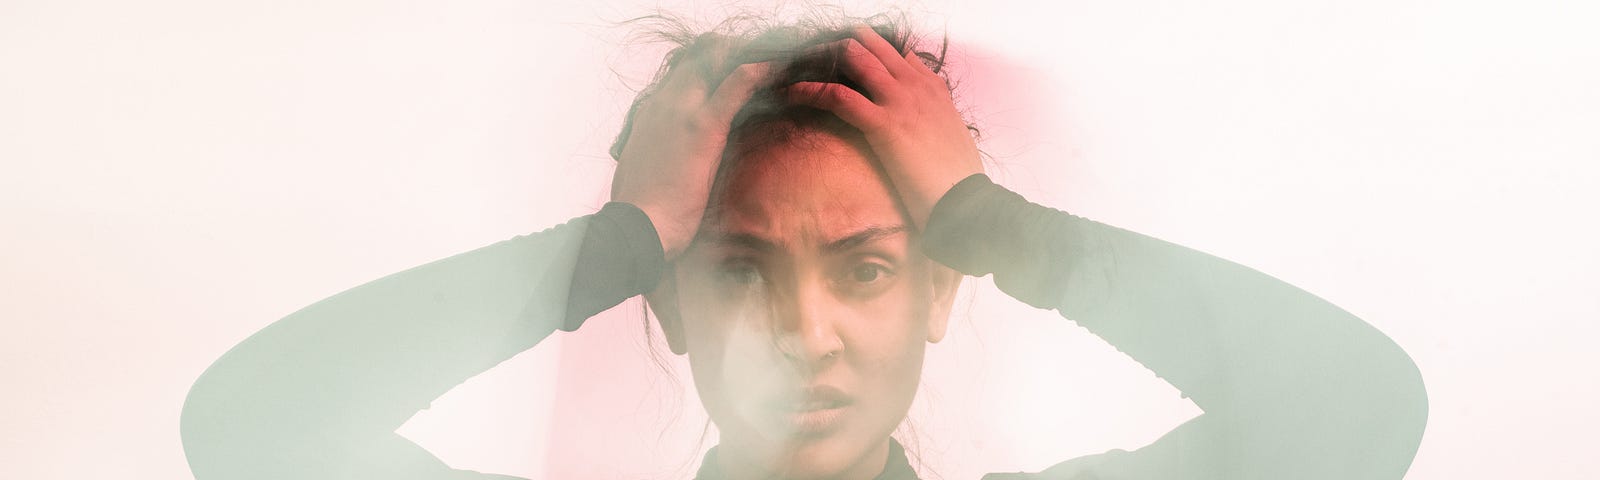 A woman in a green sweater holding her head. There is a small layer of fog or blurring over the picture.